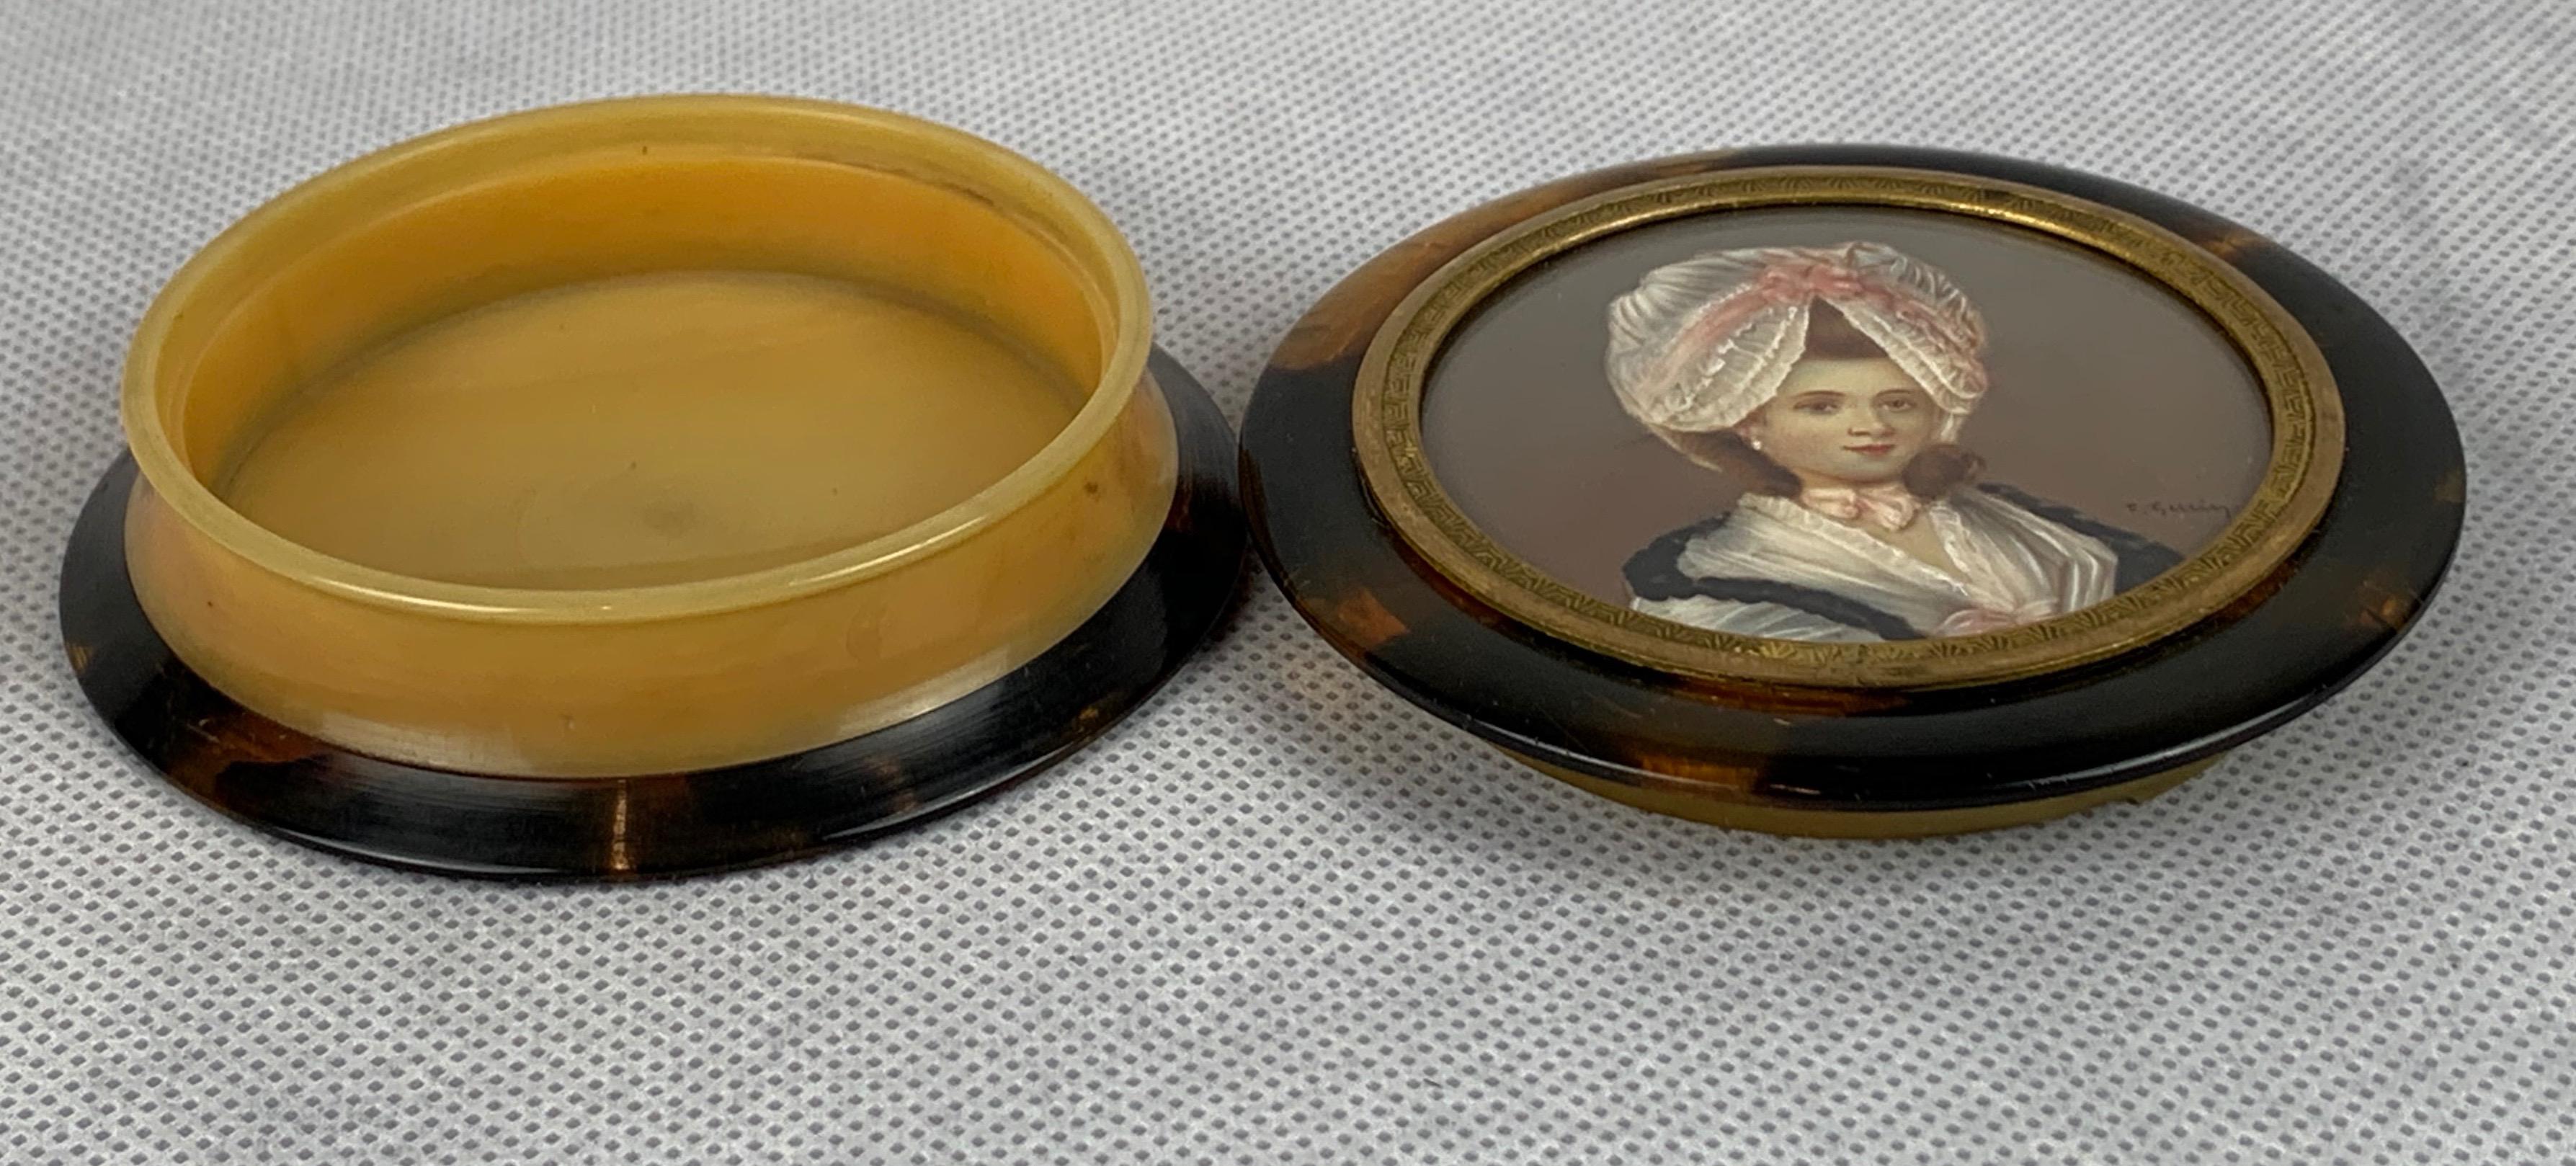 Georgian Miniature of a Lady on a Round Snuff Box, Signed-England, 19th c.